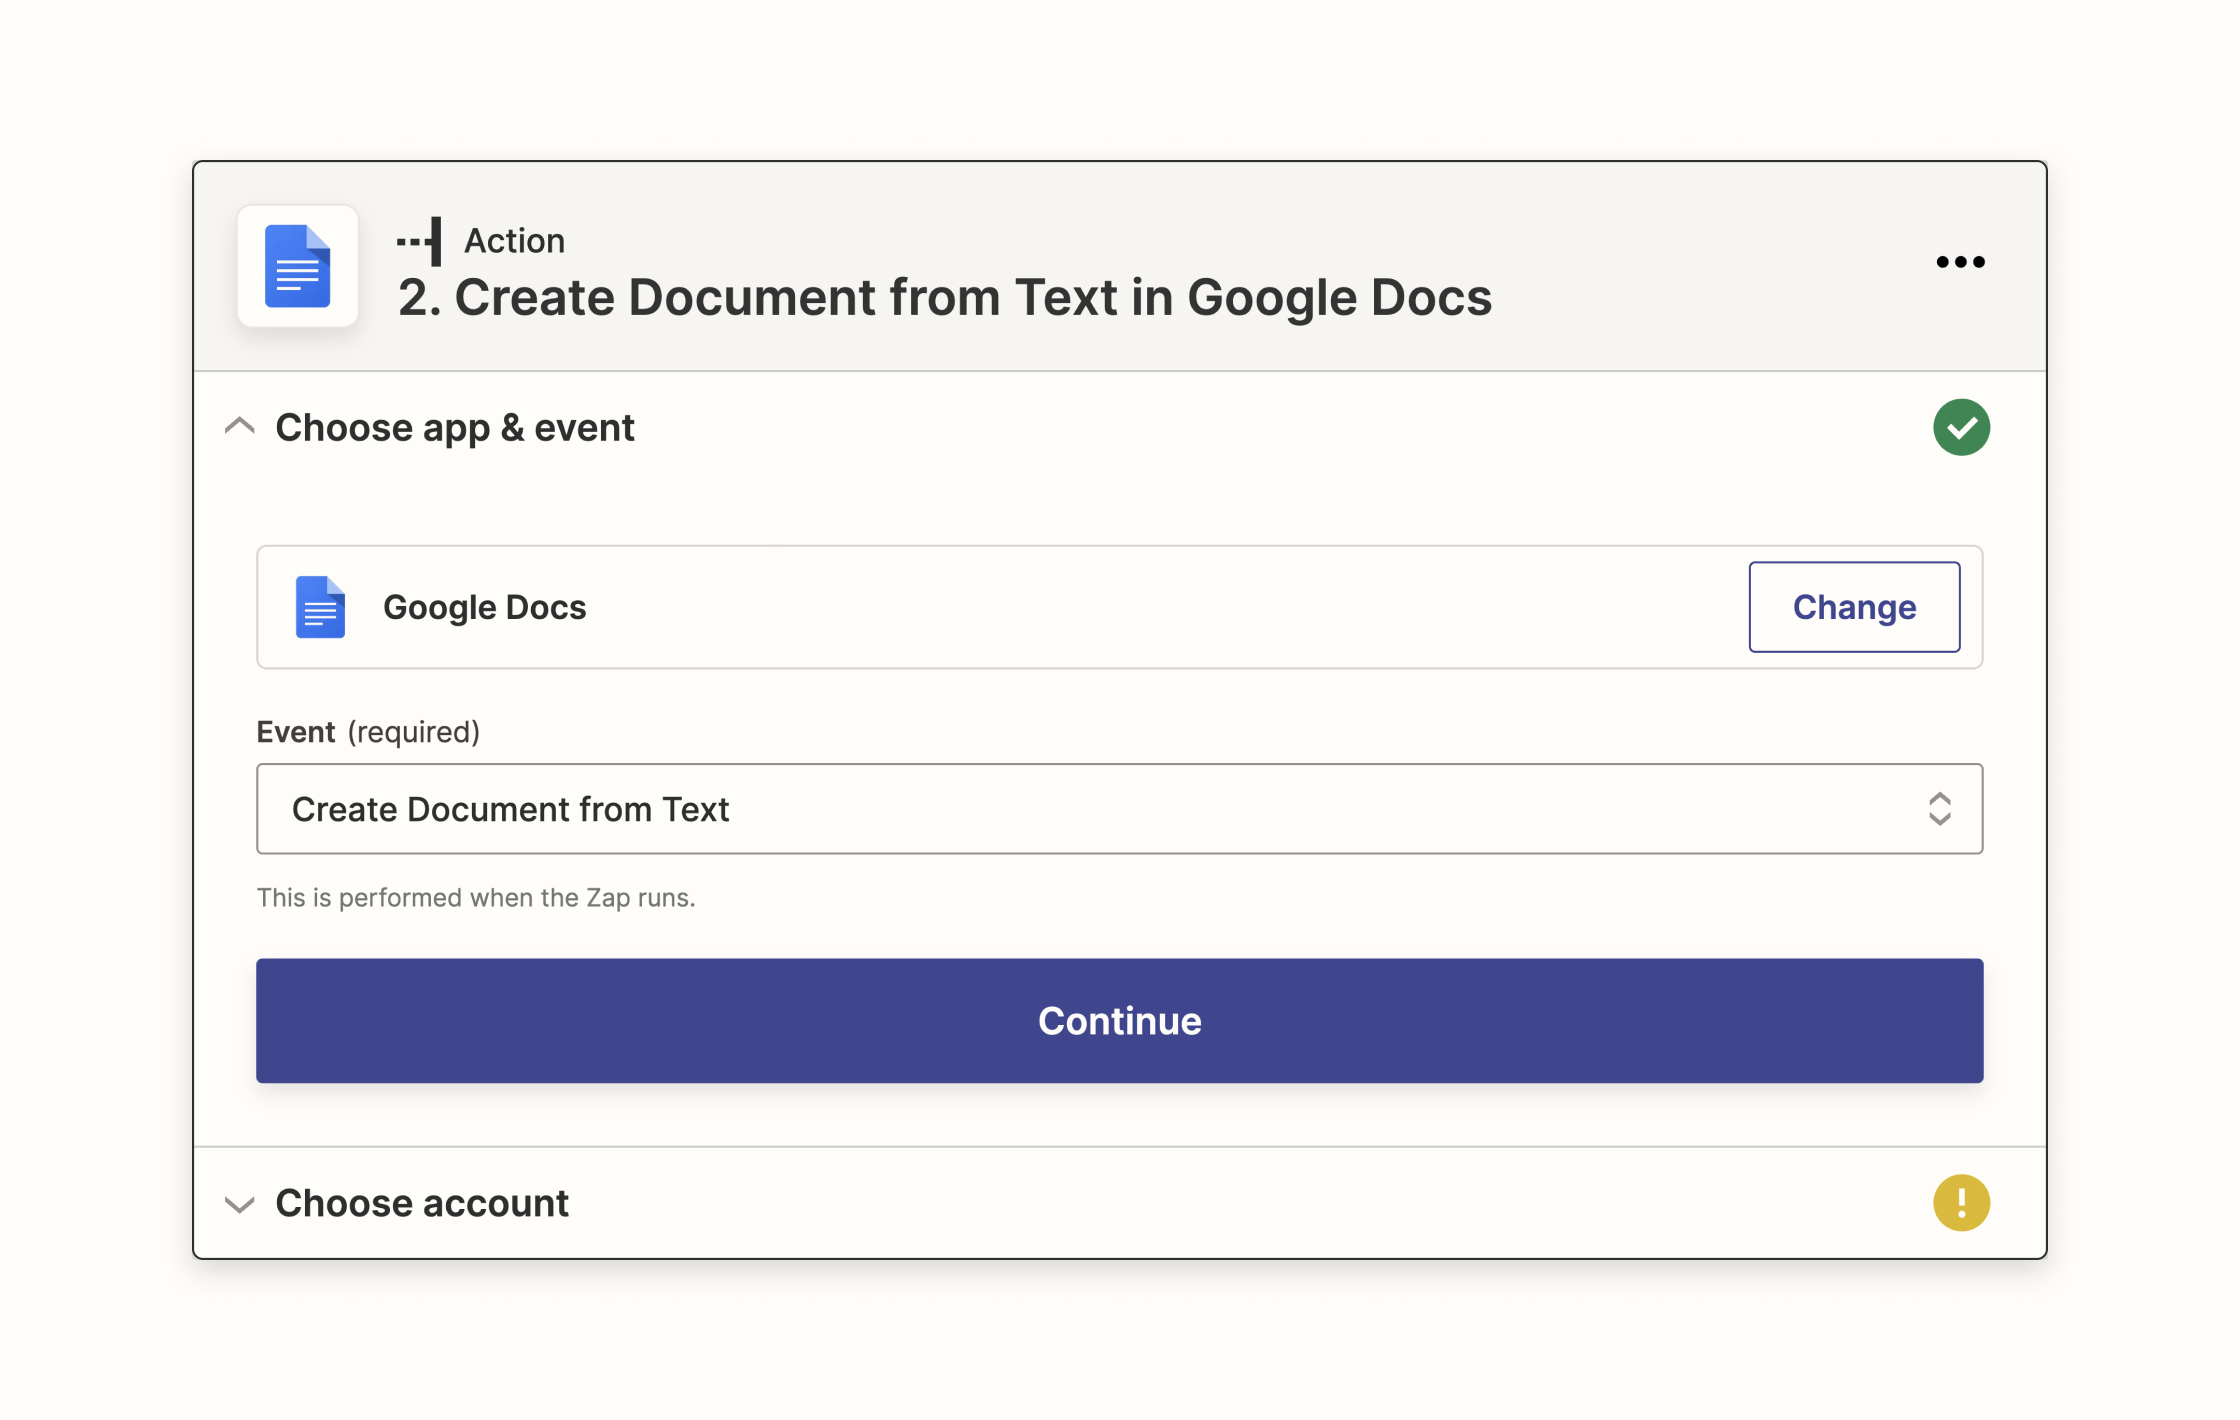 Create Document from text in Google Docs